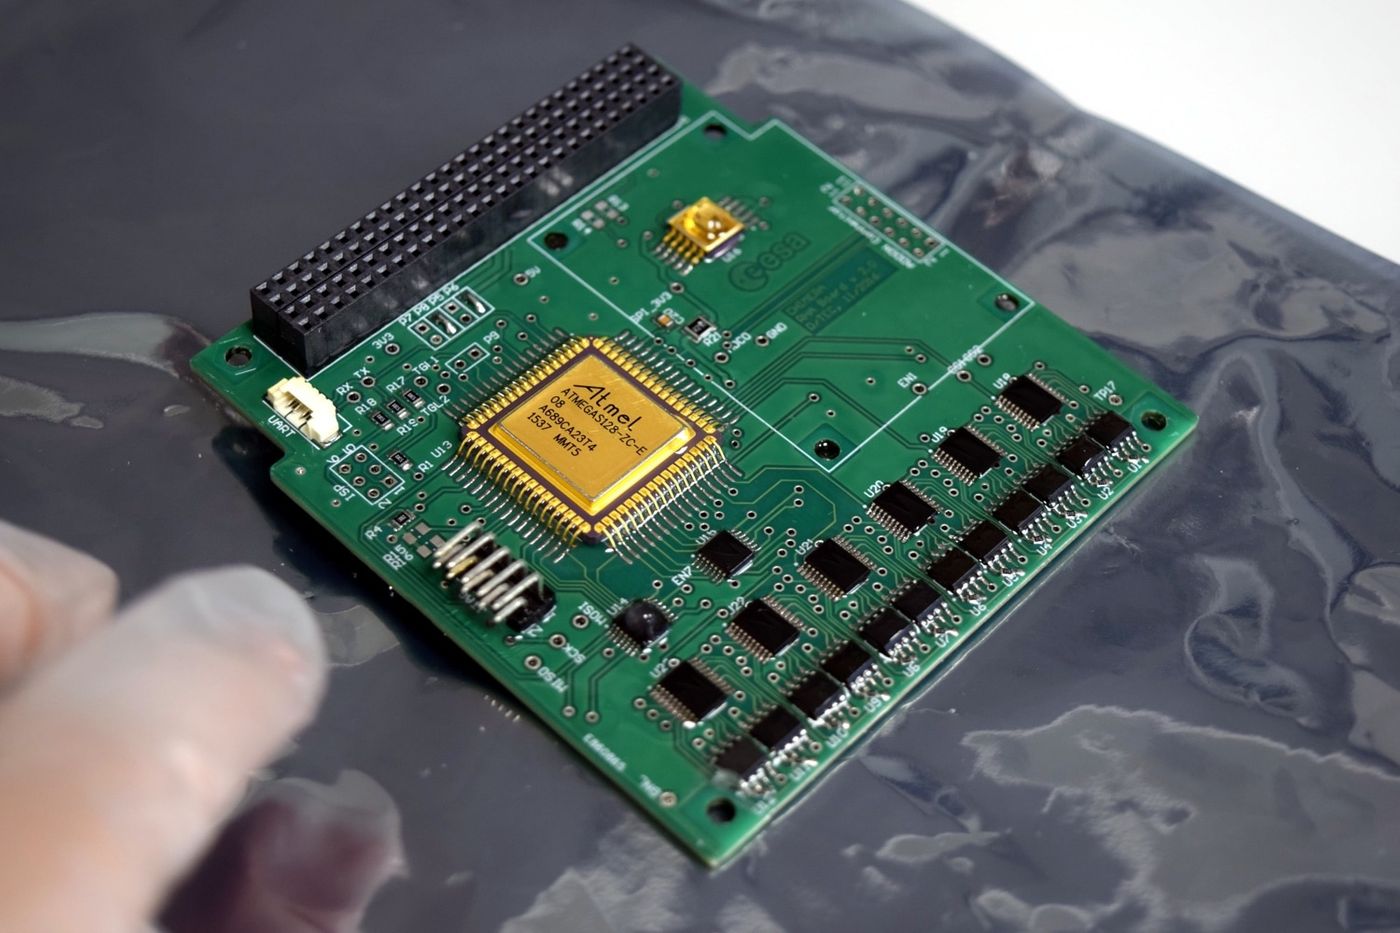 Chimera is a computer logic board that the ESA wants to send into space for testing.